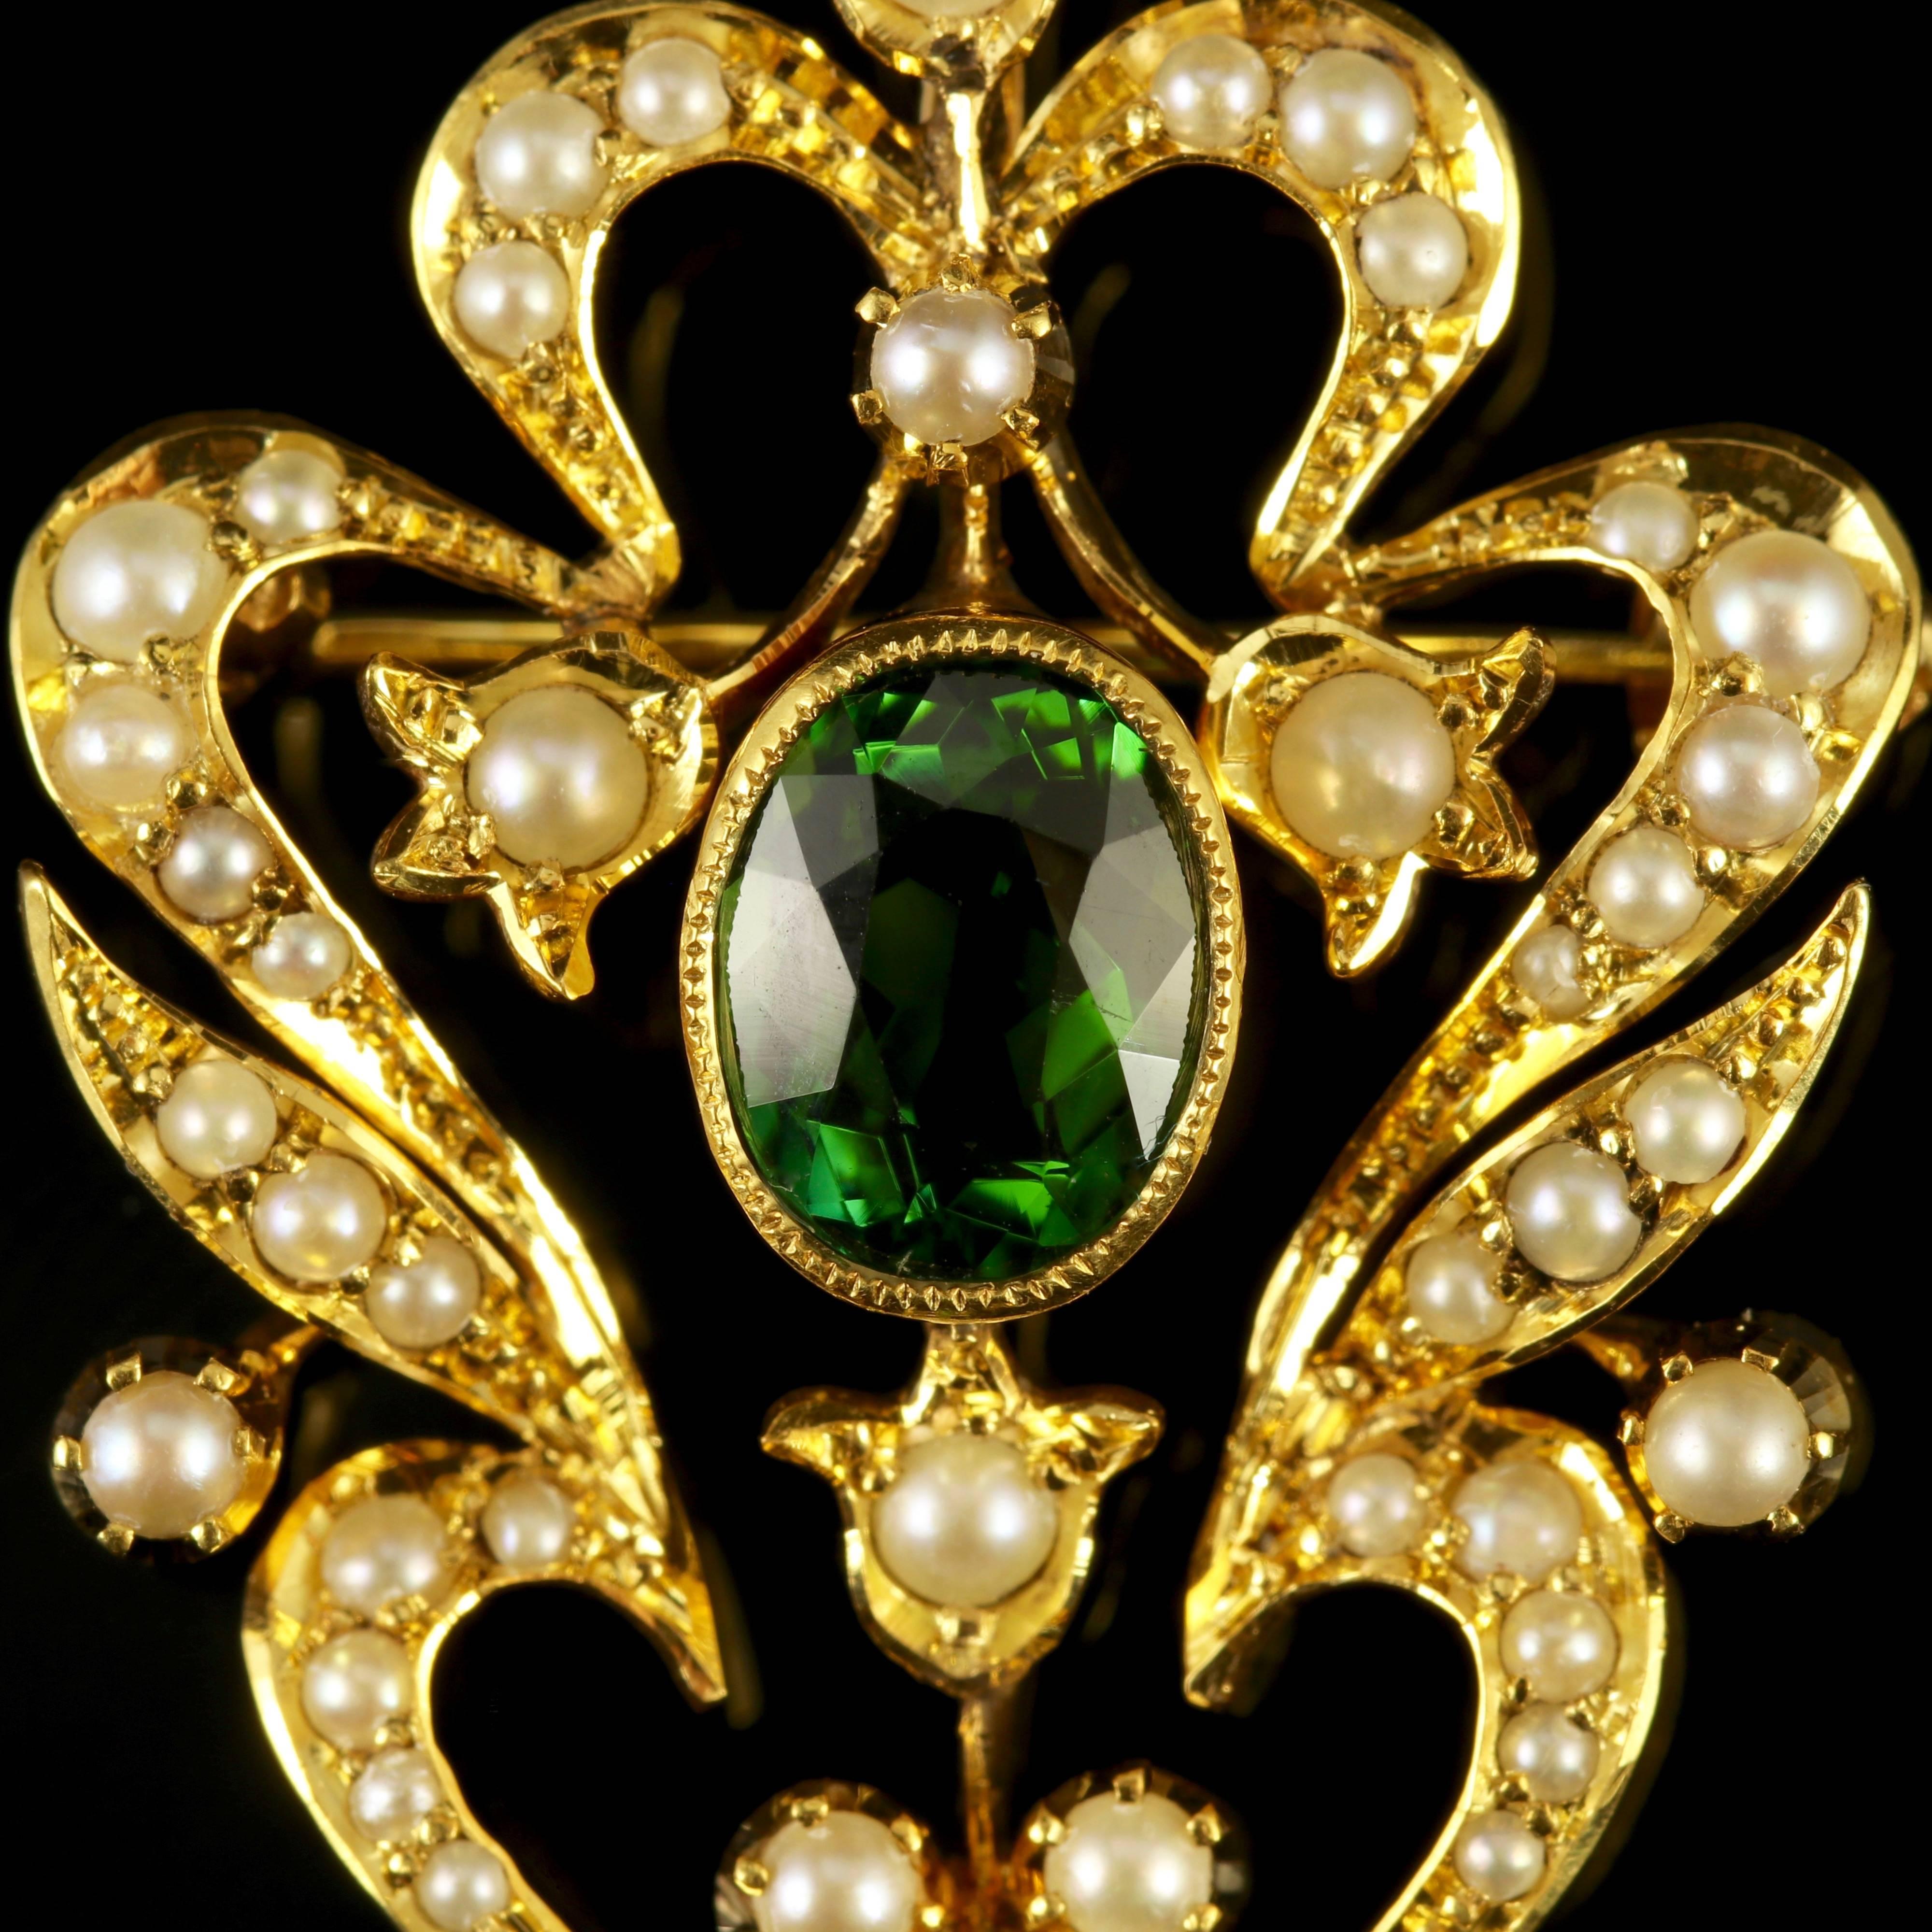 This fabulous 15ct Yellow Gold antique Victorian pendant brooch is adorned with Pearls and green Tourmaline’s, Circa 1900.

The central green Tourmaline is 1.50ct in size, the dropper stone is 1.30ct in size.

Green Tourmaline’s are believed to